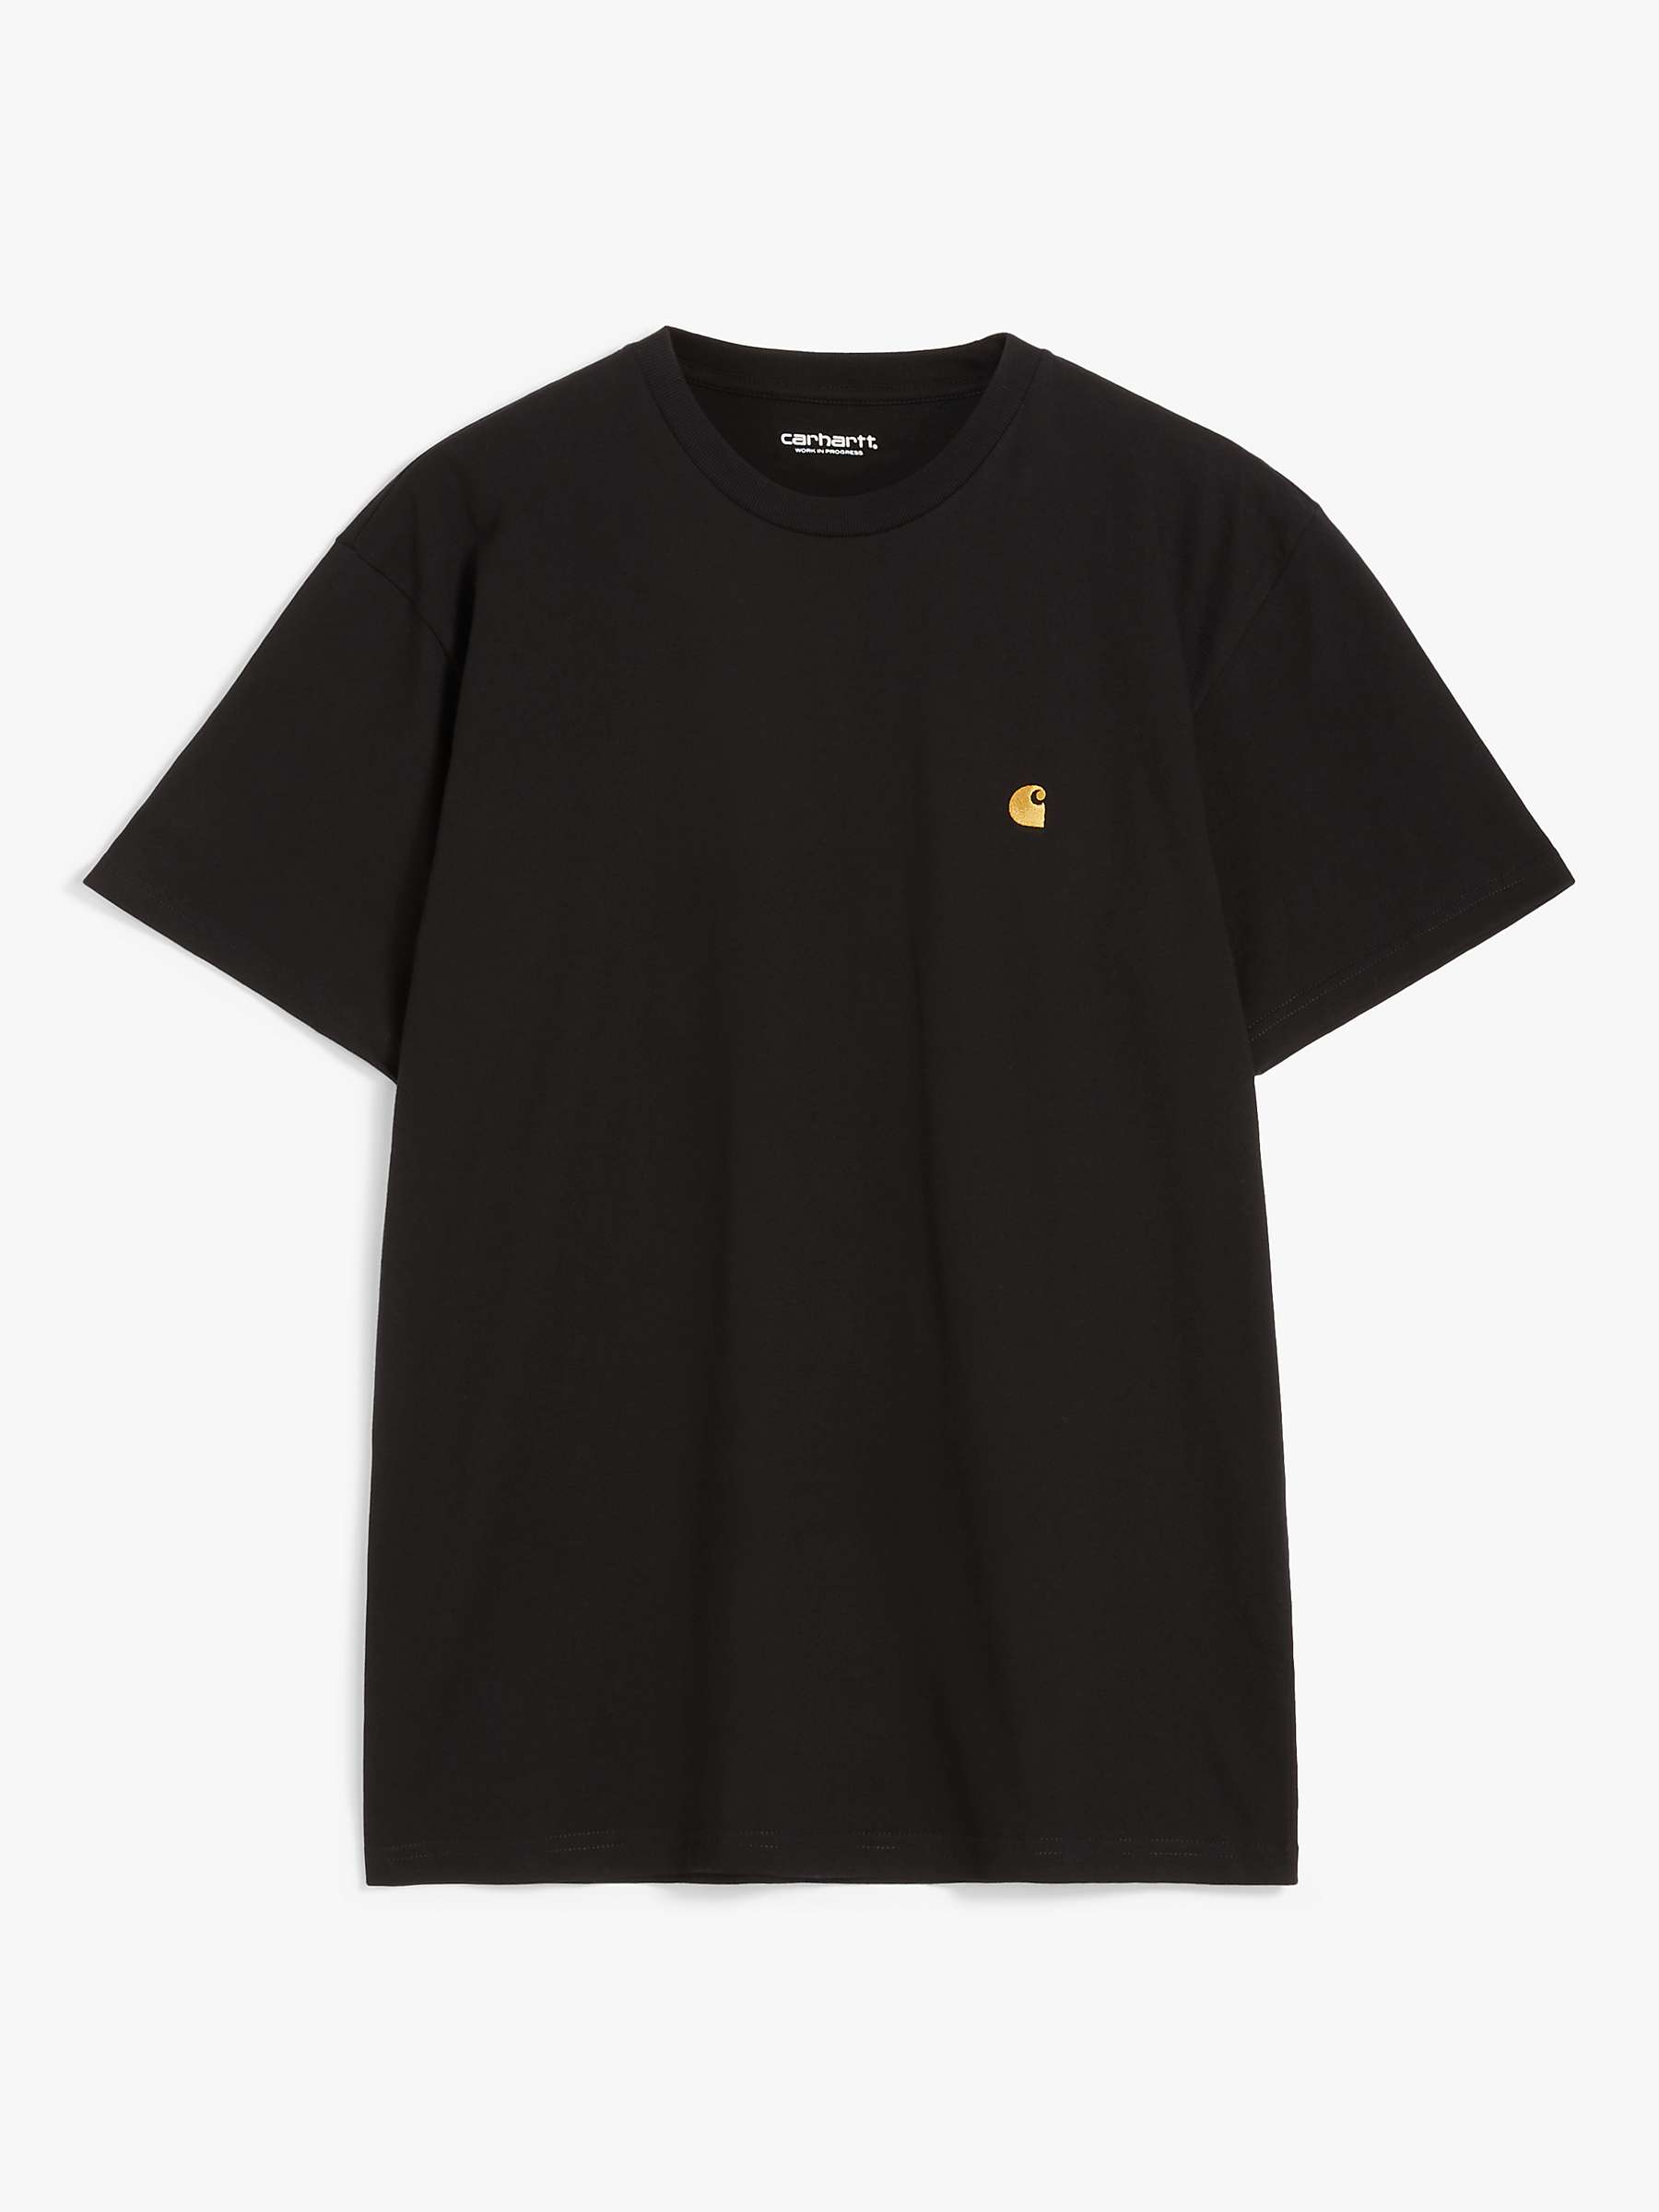 Buy Carhartt WIP Chase Short Sleeve T-Shirt Online at johnlewis.com